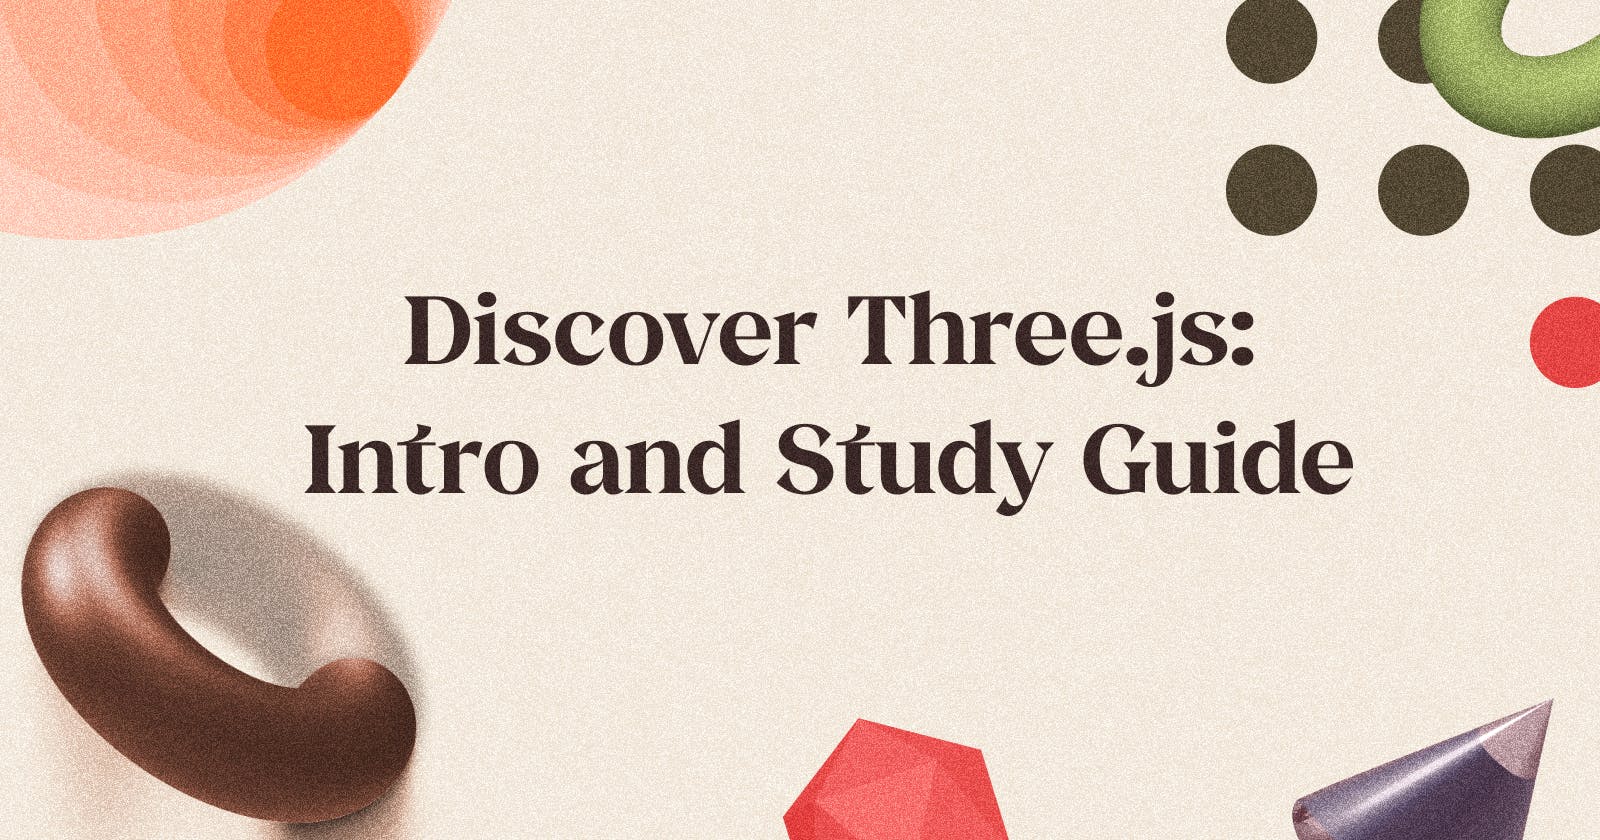 Discover Three.js: Intro and Study Guide